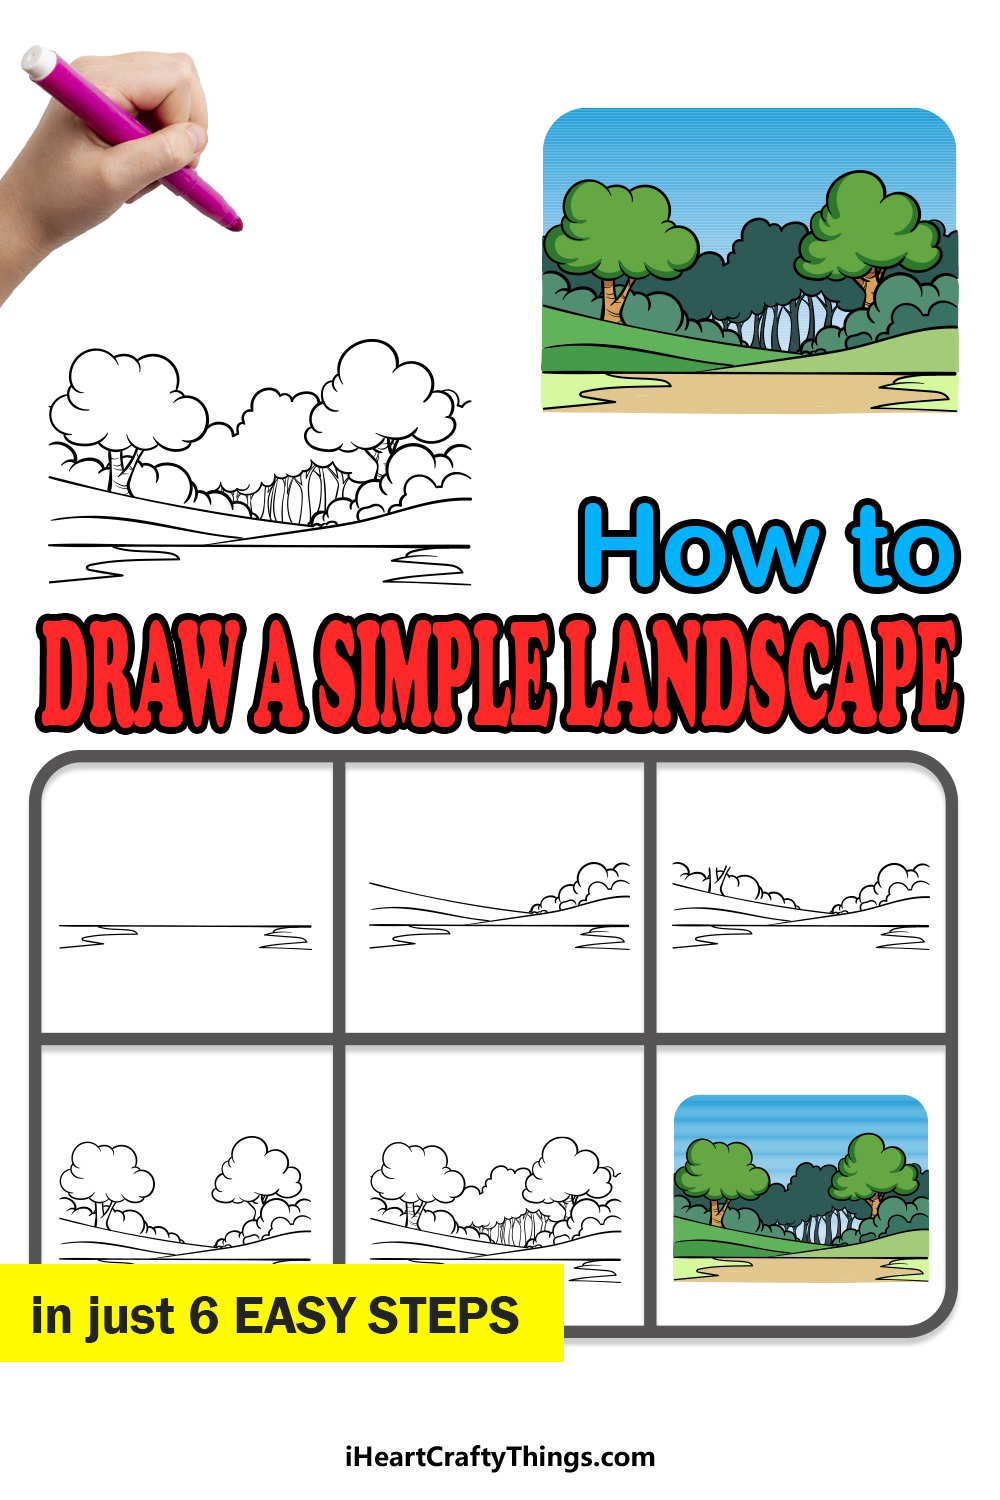 how to draw a Simple Landscape in 6 easy steps